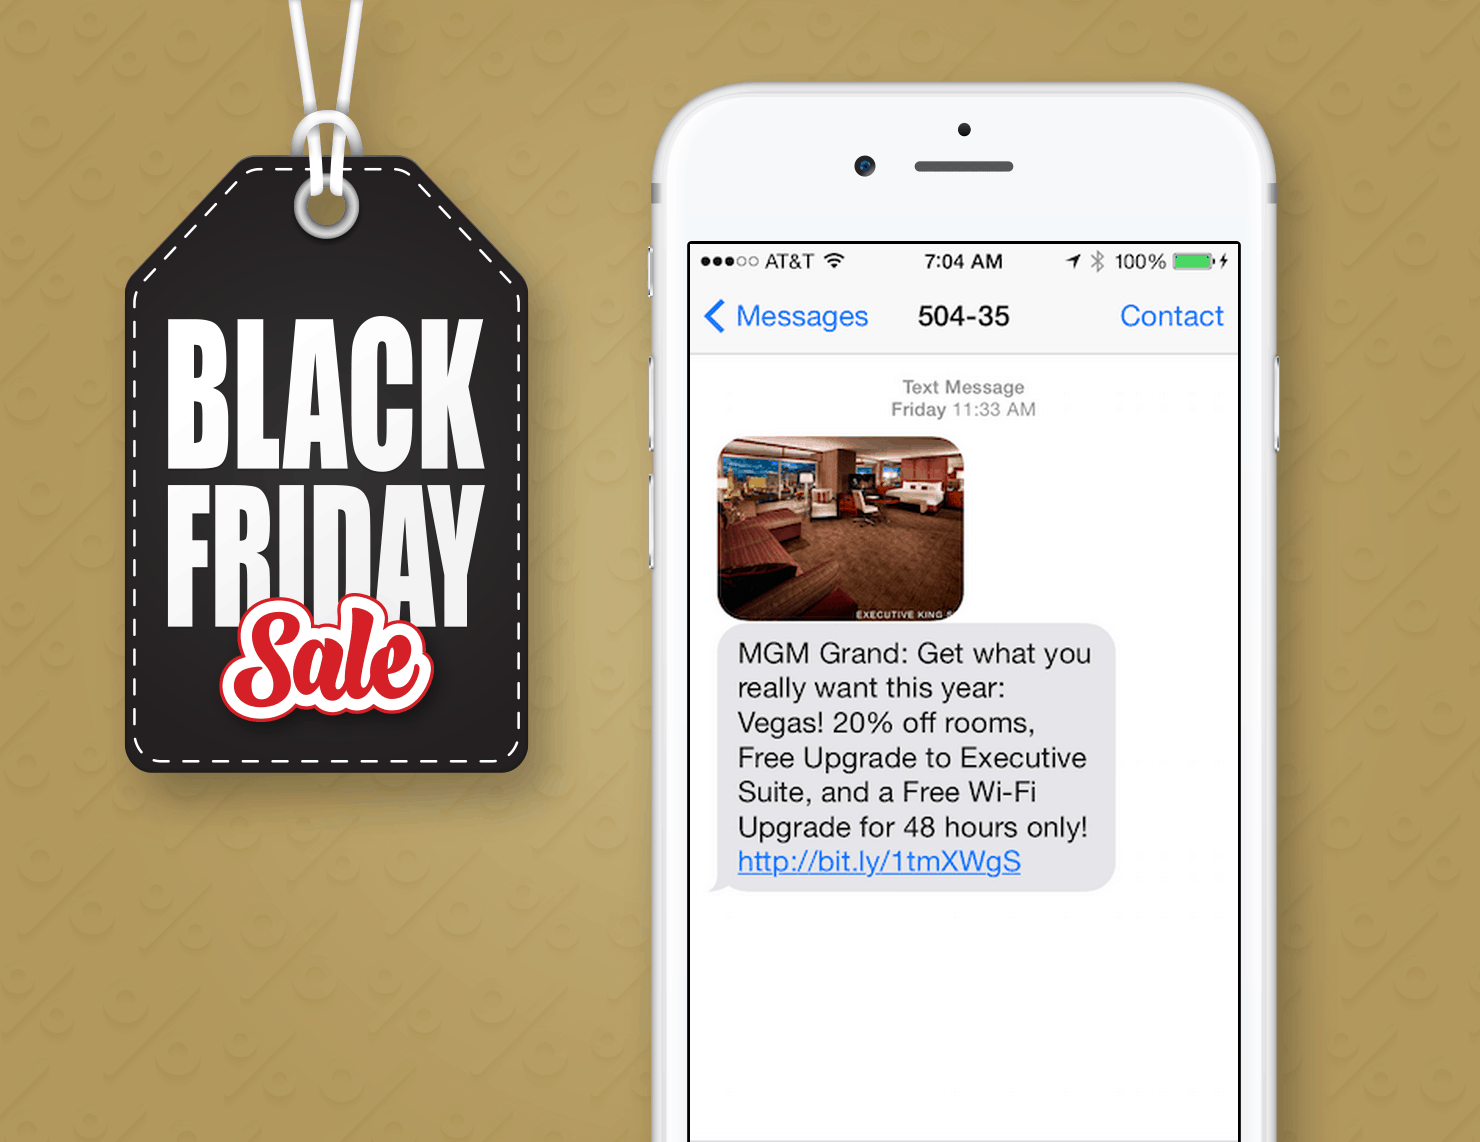 Black Friday SMS Marketing Example From MGM Grand Hotels